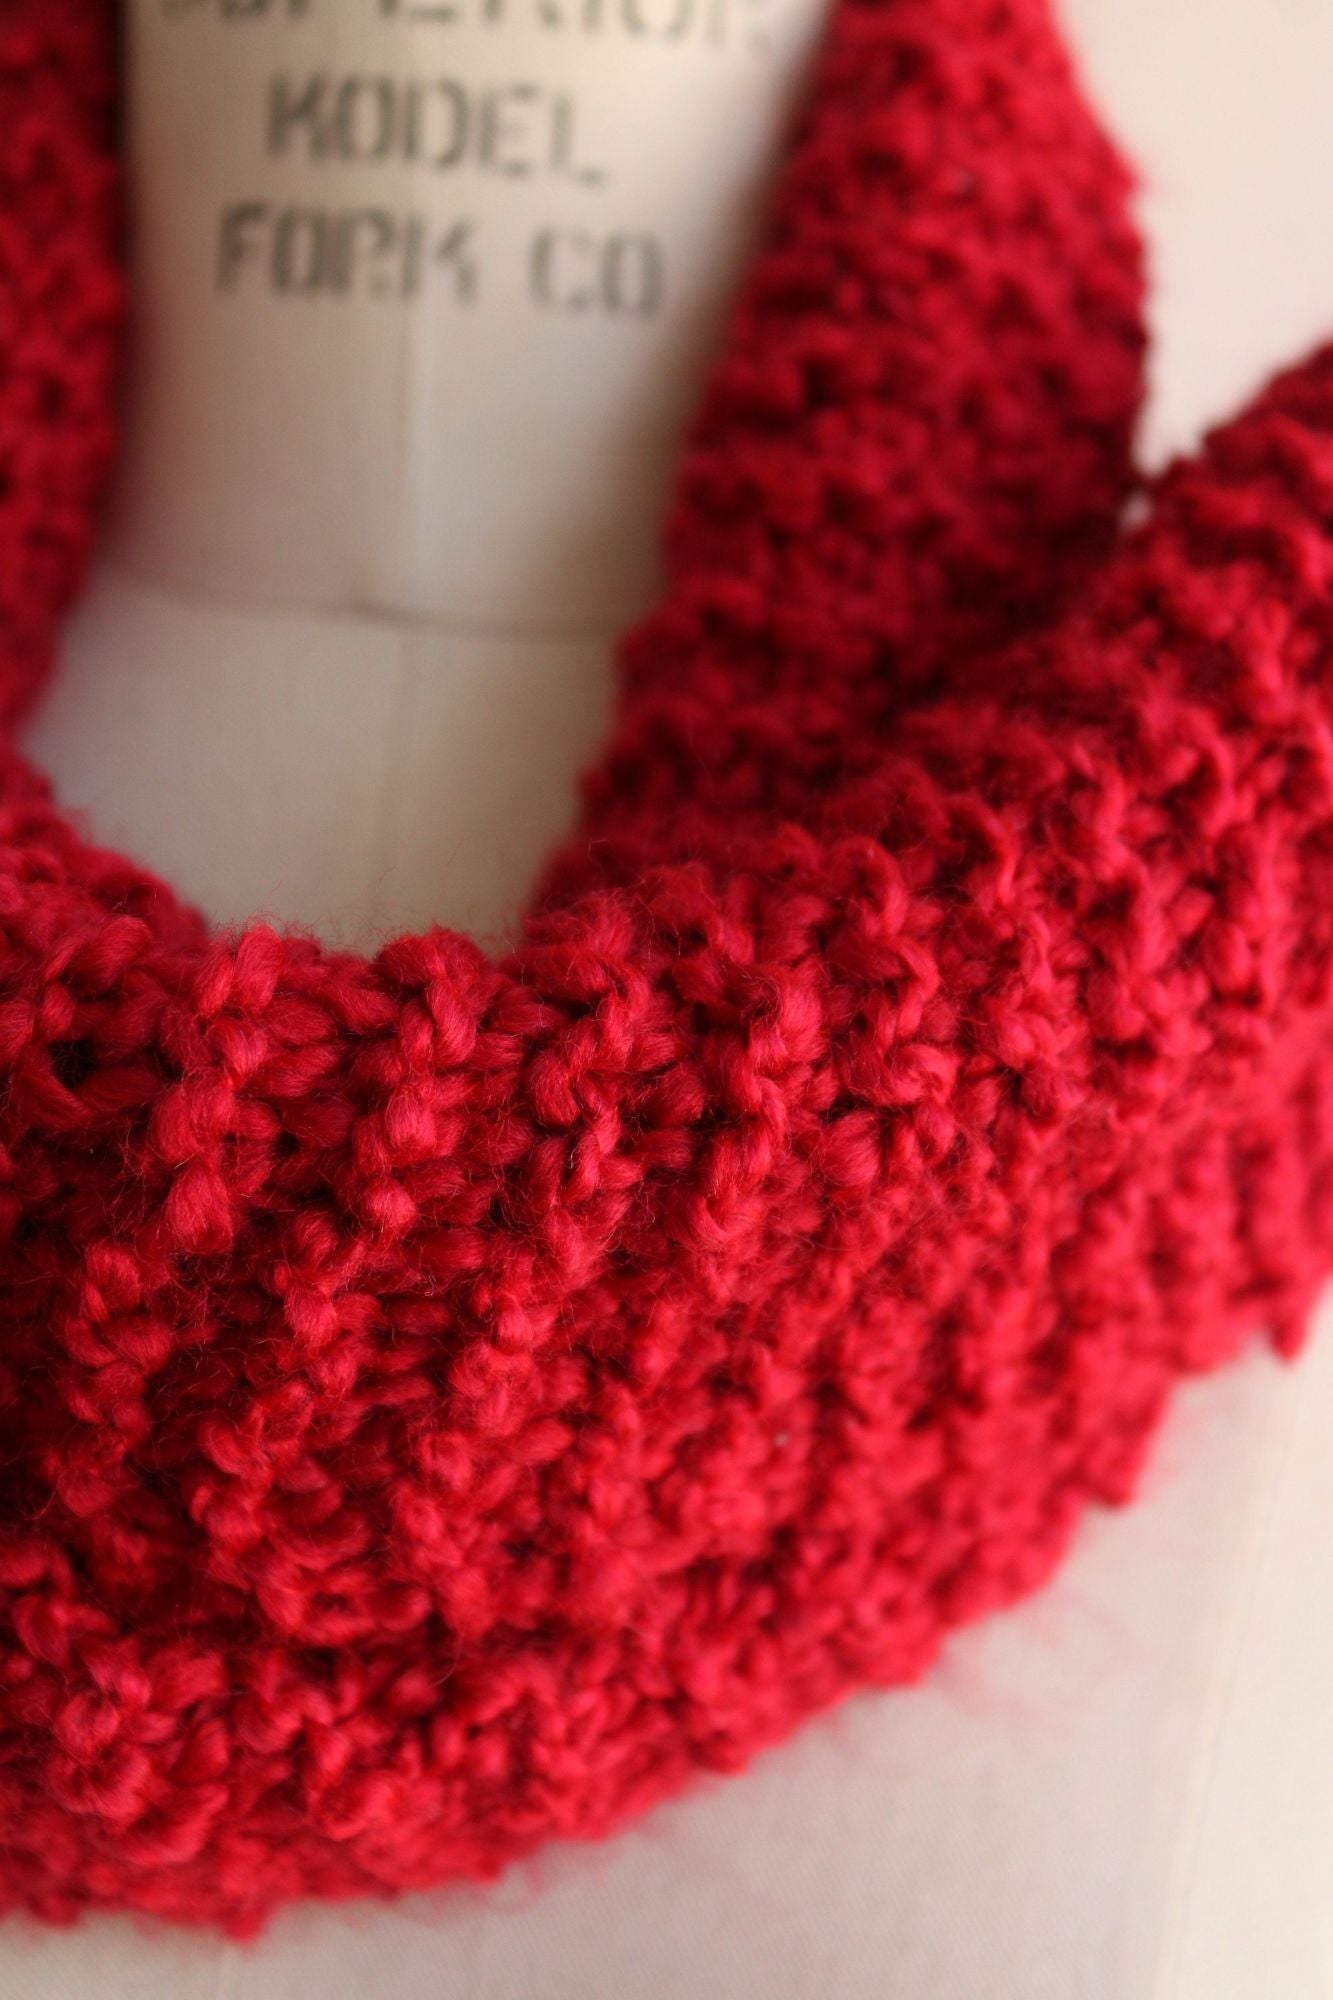 The "Crimson" Knit Scarf in a Chunky Red Boucle Yarn